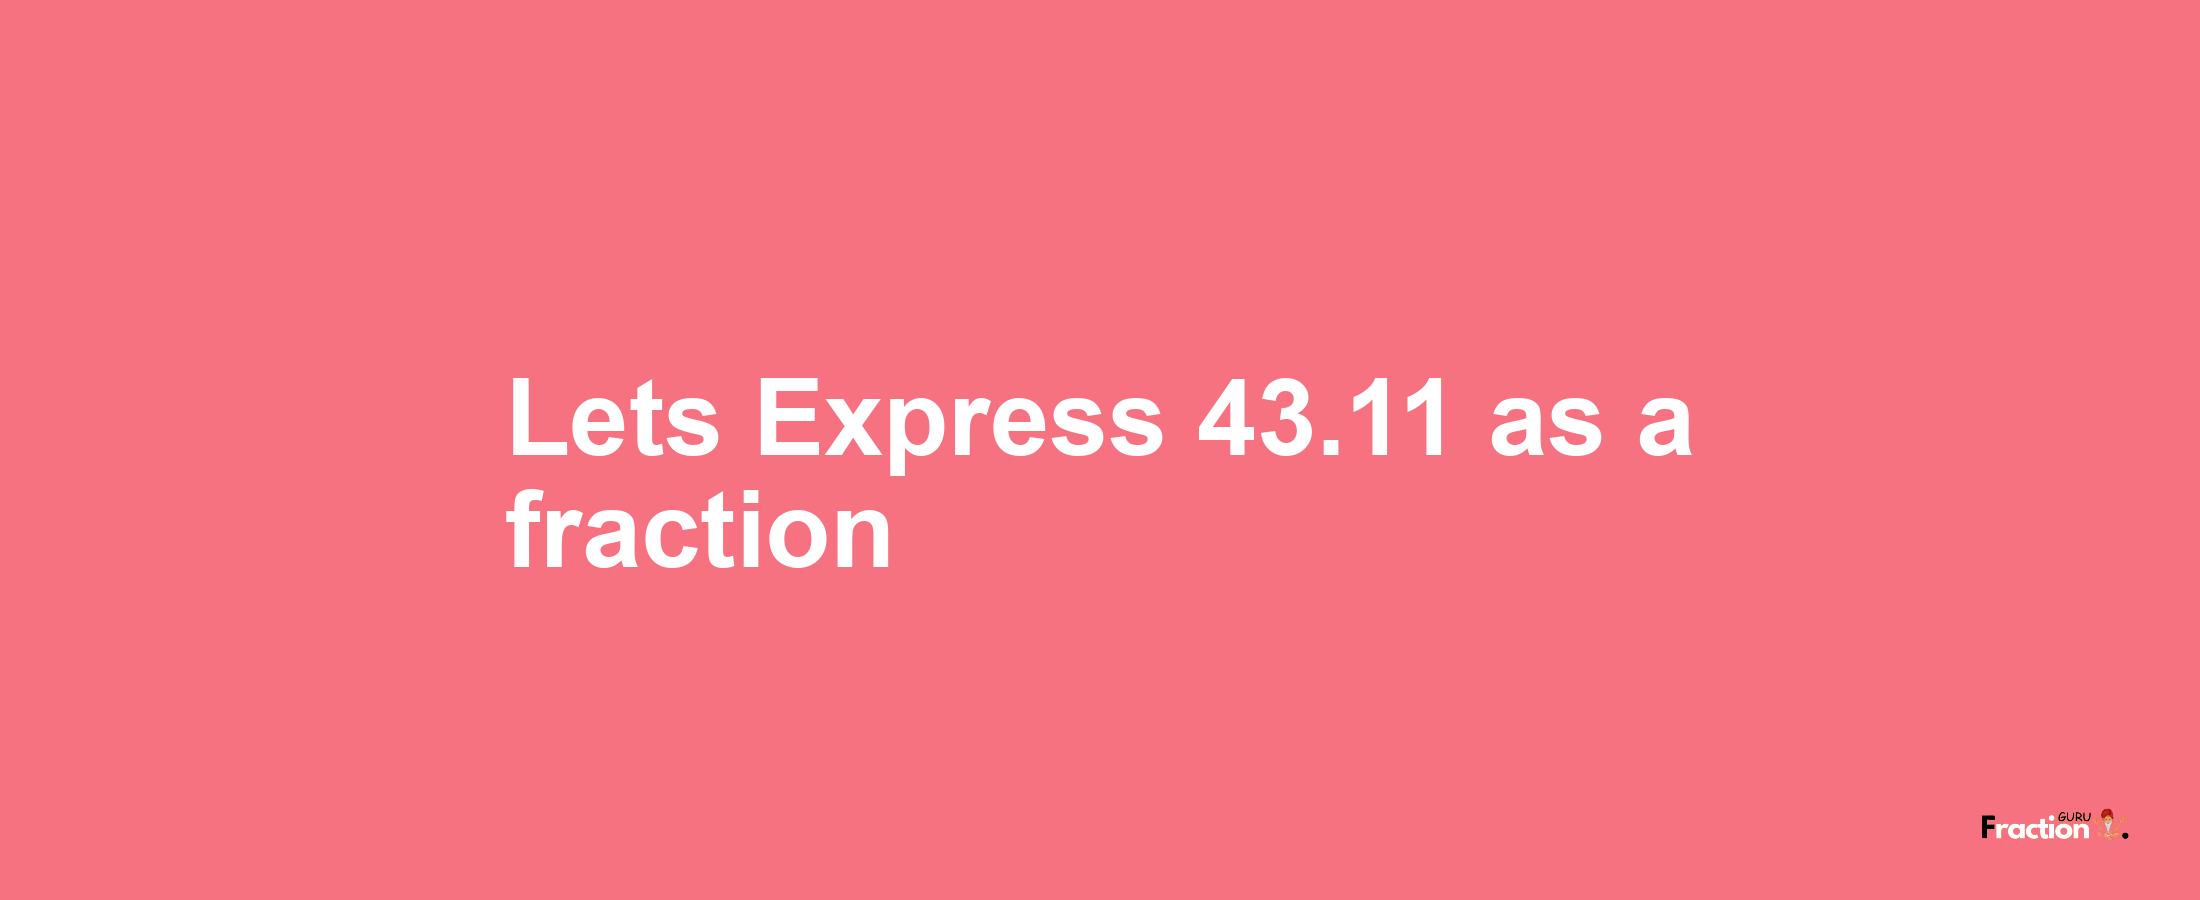 Lets Express 43.11 as afraction